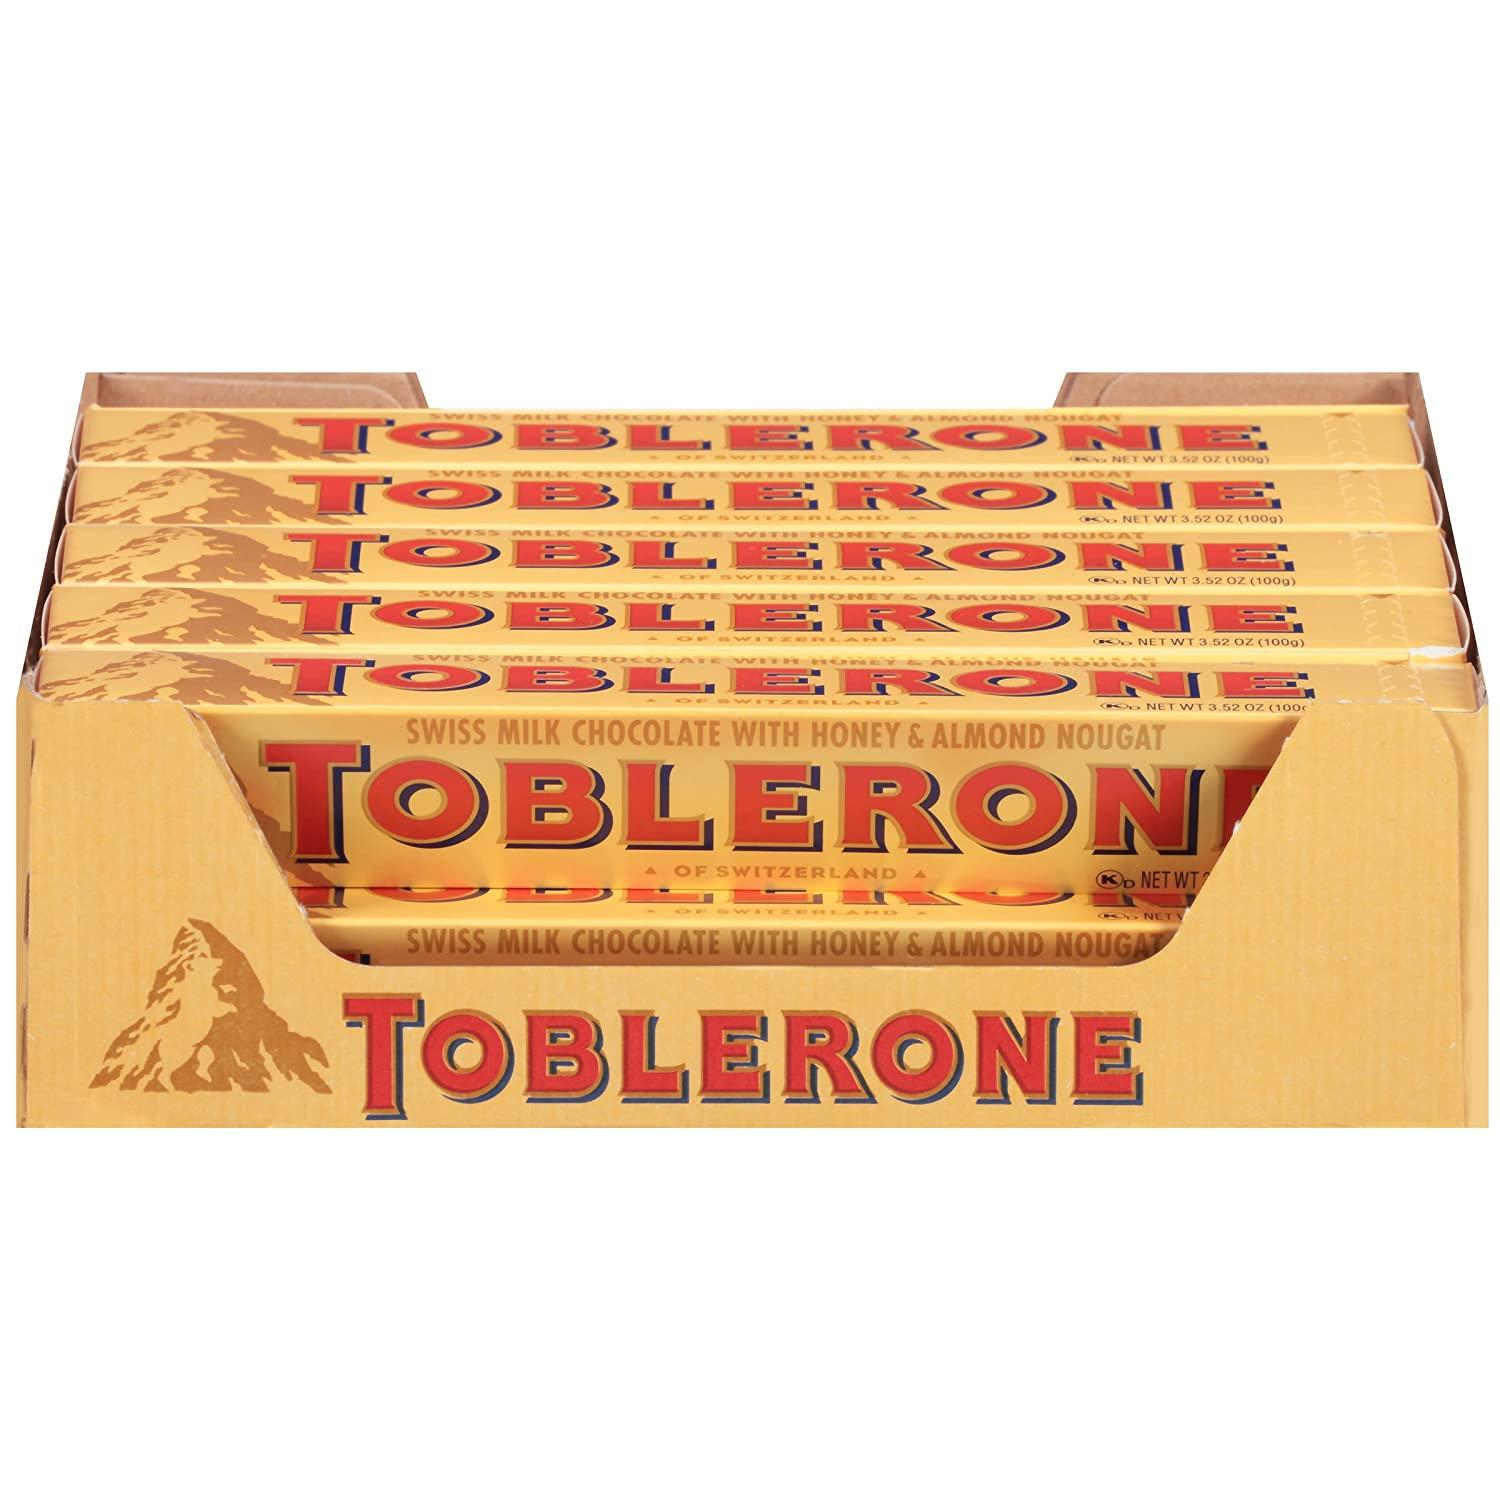 20 Toblerone Swiss Milk Chocolate Honey and Almond Nougat Bars for $19.64 Shipped